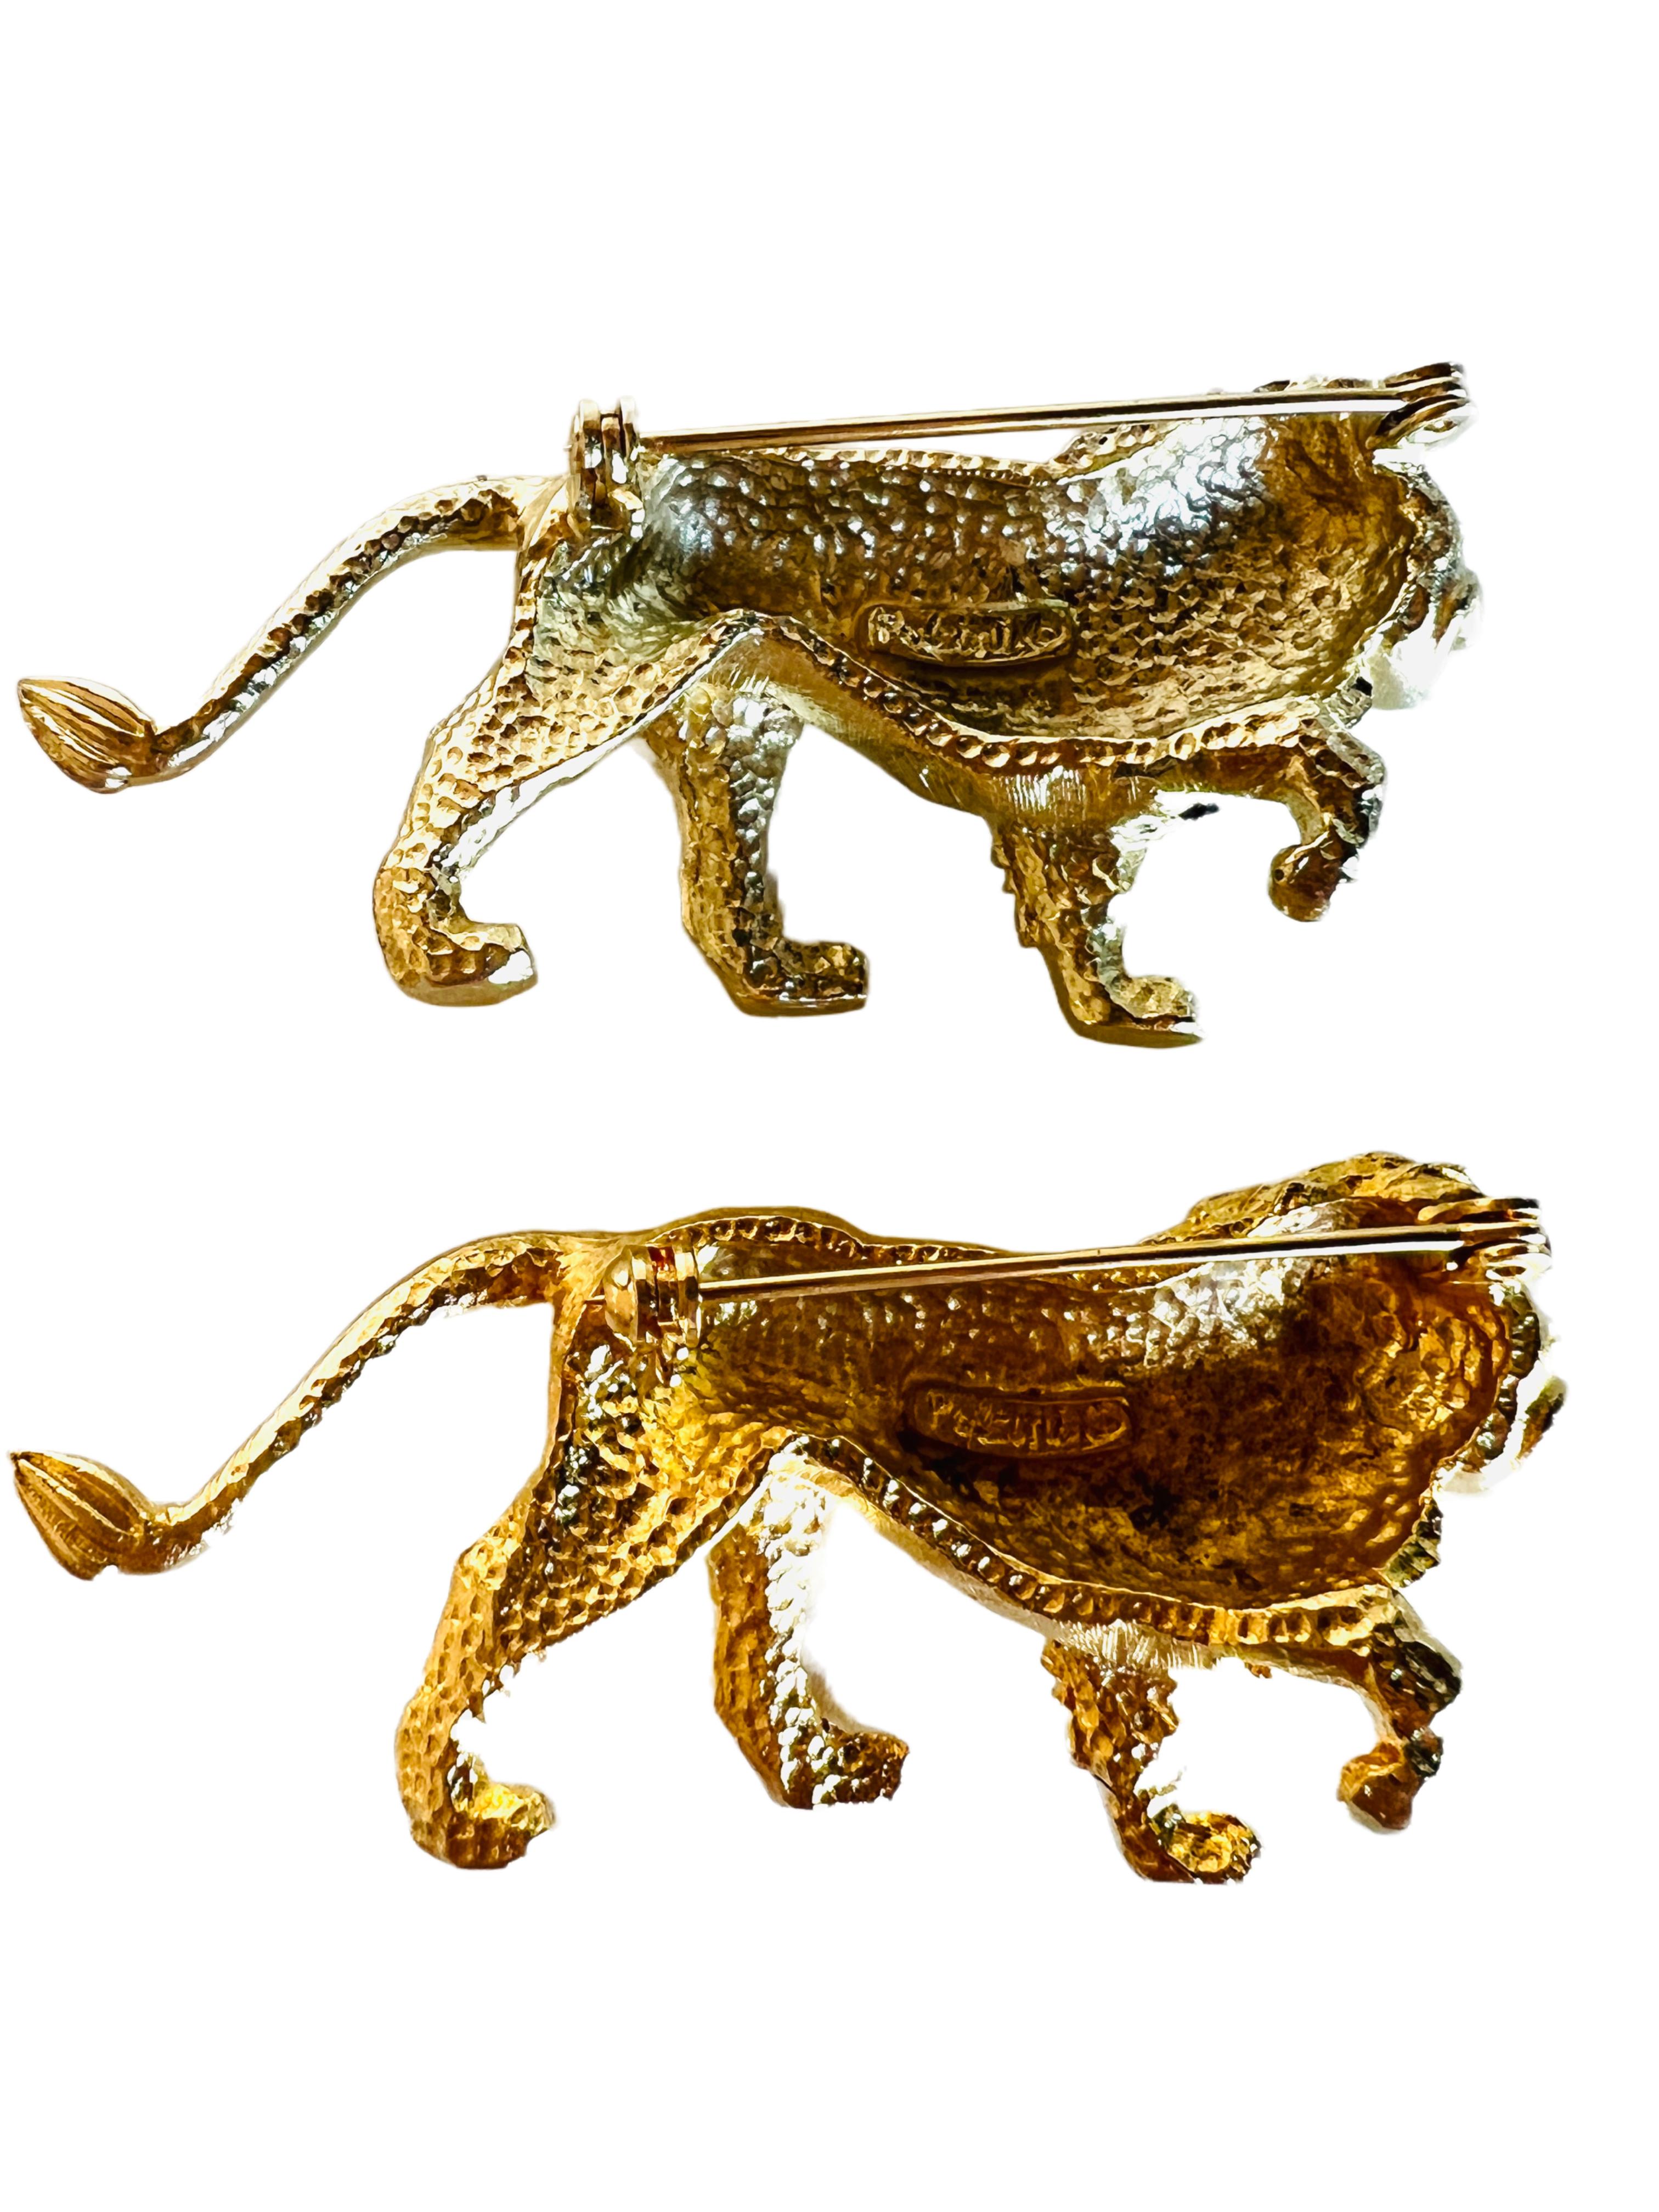 Fabulous pair of lion brooches by designer Polcini featuring gold plated metal and a rhinestone eye. 

Size: 2-1/2